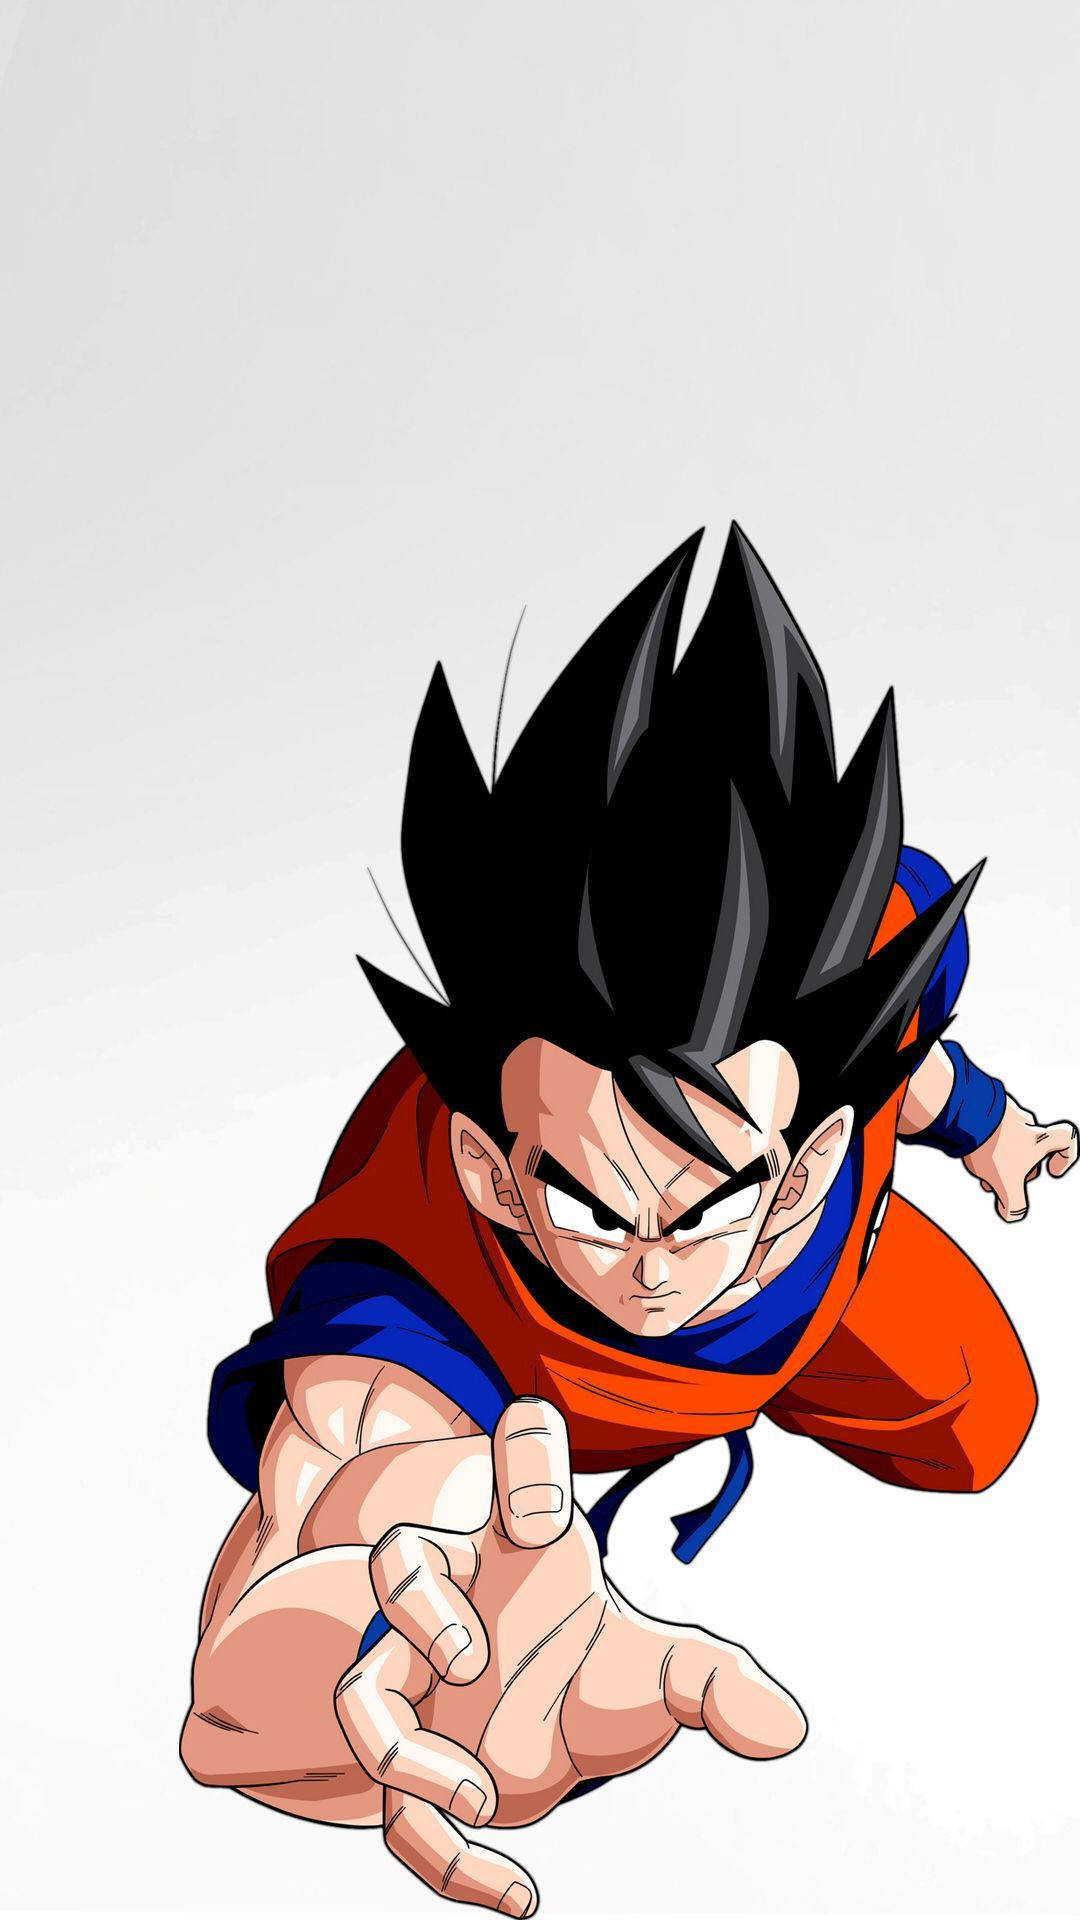 Vuxensvart Hårig Son Goku Iphone (note: This Is A Direct Translation And May Not Be The Most Commonly Used Phrasing For Computer Or Mobile Wallpaper). Wallpaper